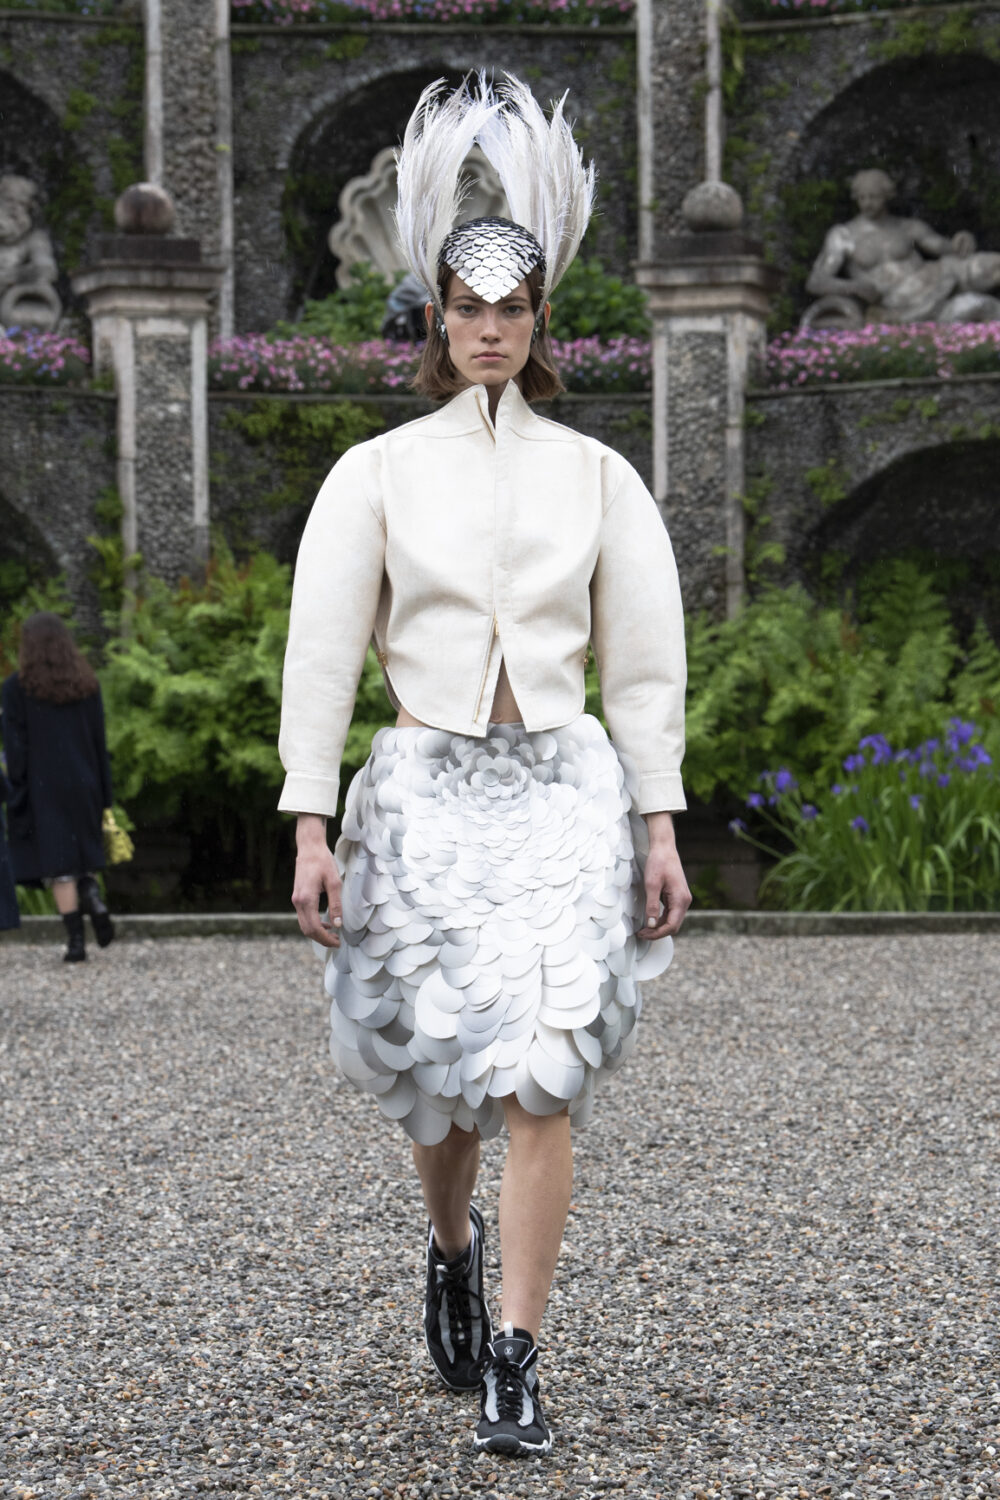 Louis Vuitton's Cruise 2024 Show in Isola Bella Celebrated the